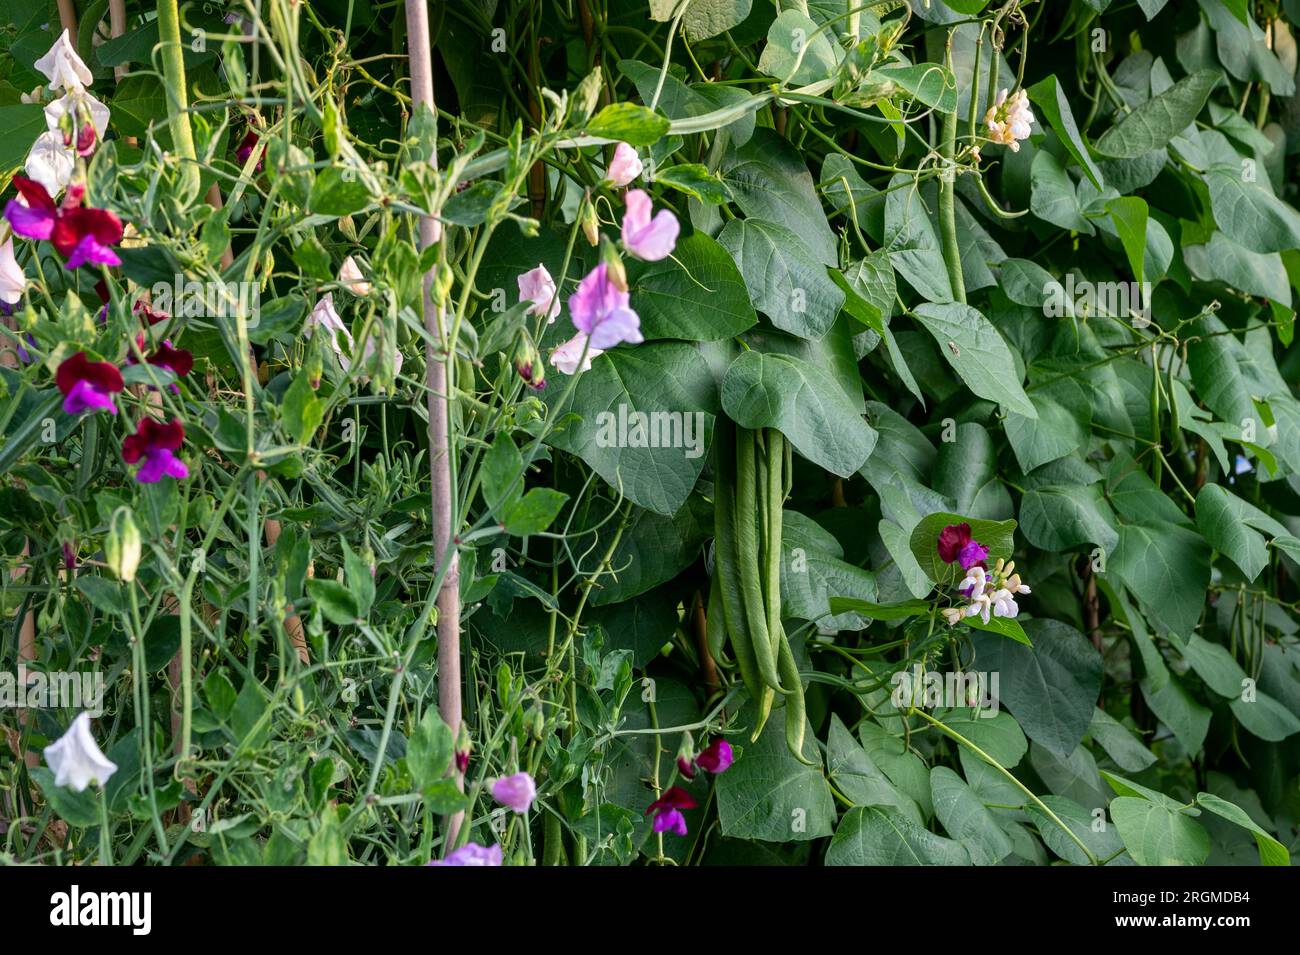 Sweet peas (Lathyrus odoratus) grown as a companion plant for runner beans to attract pollinators. Stock Photo